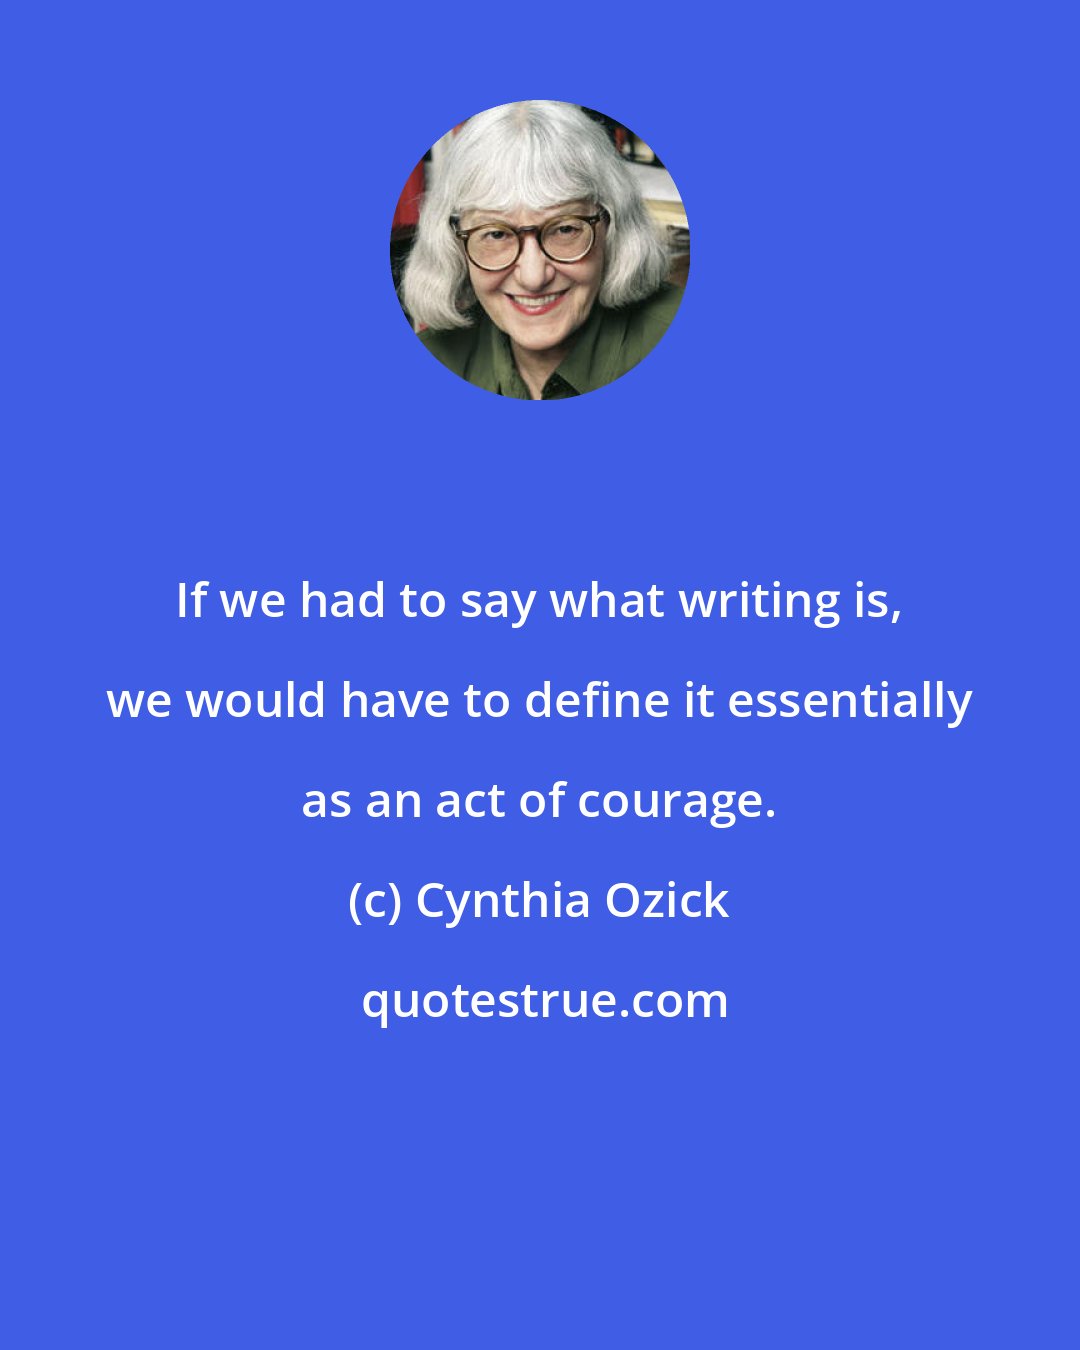 Cynthia Ozick: If we had to say what writing is, we would have to define it essentially as an act of courage.